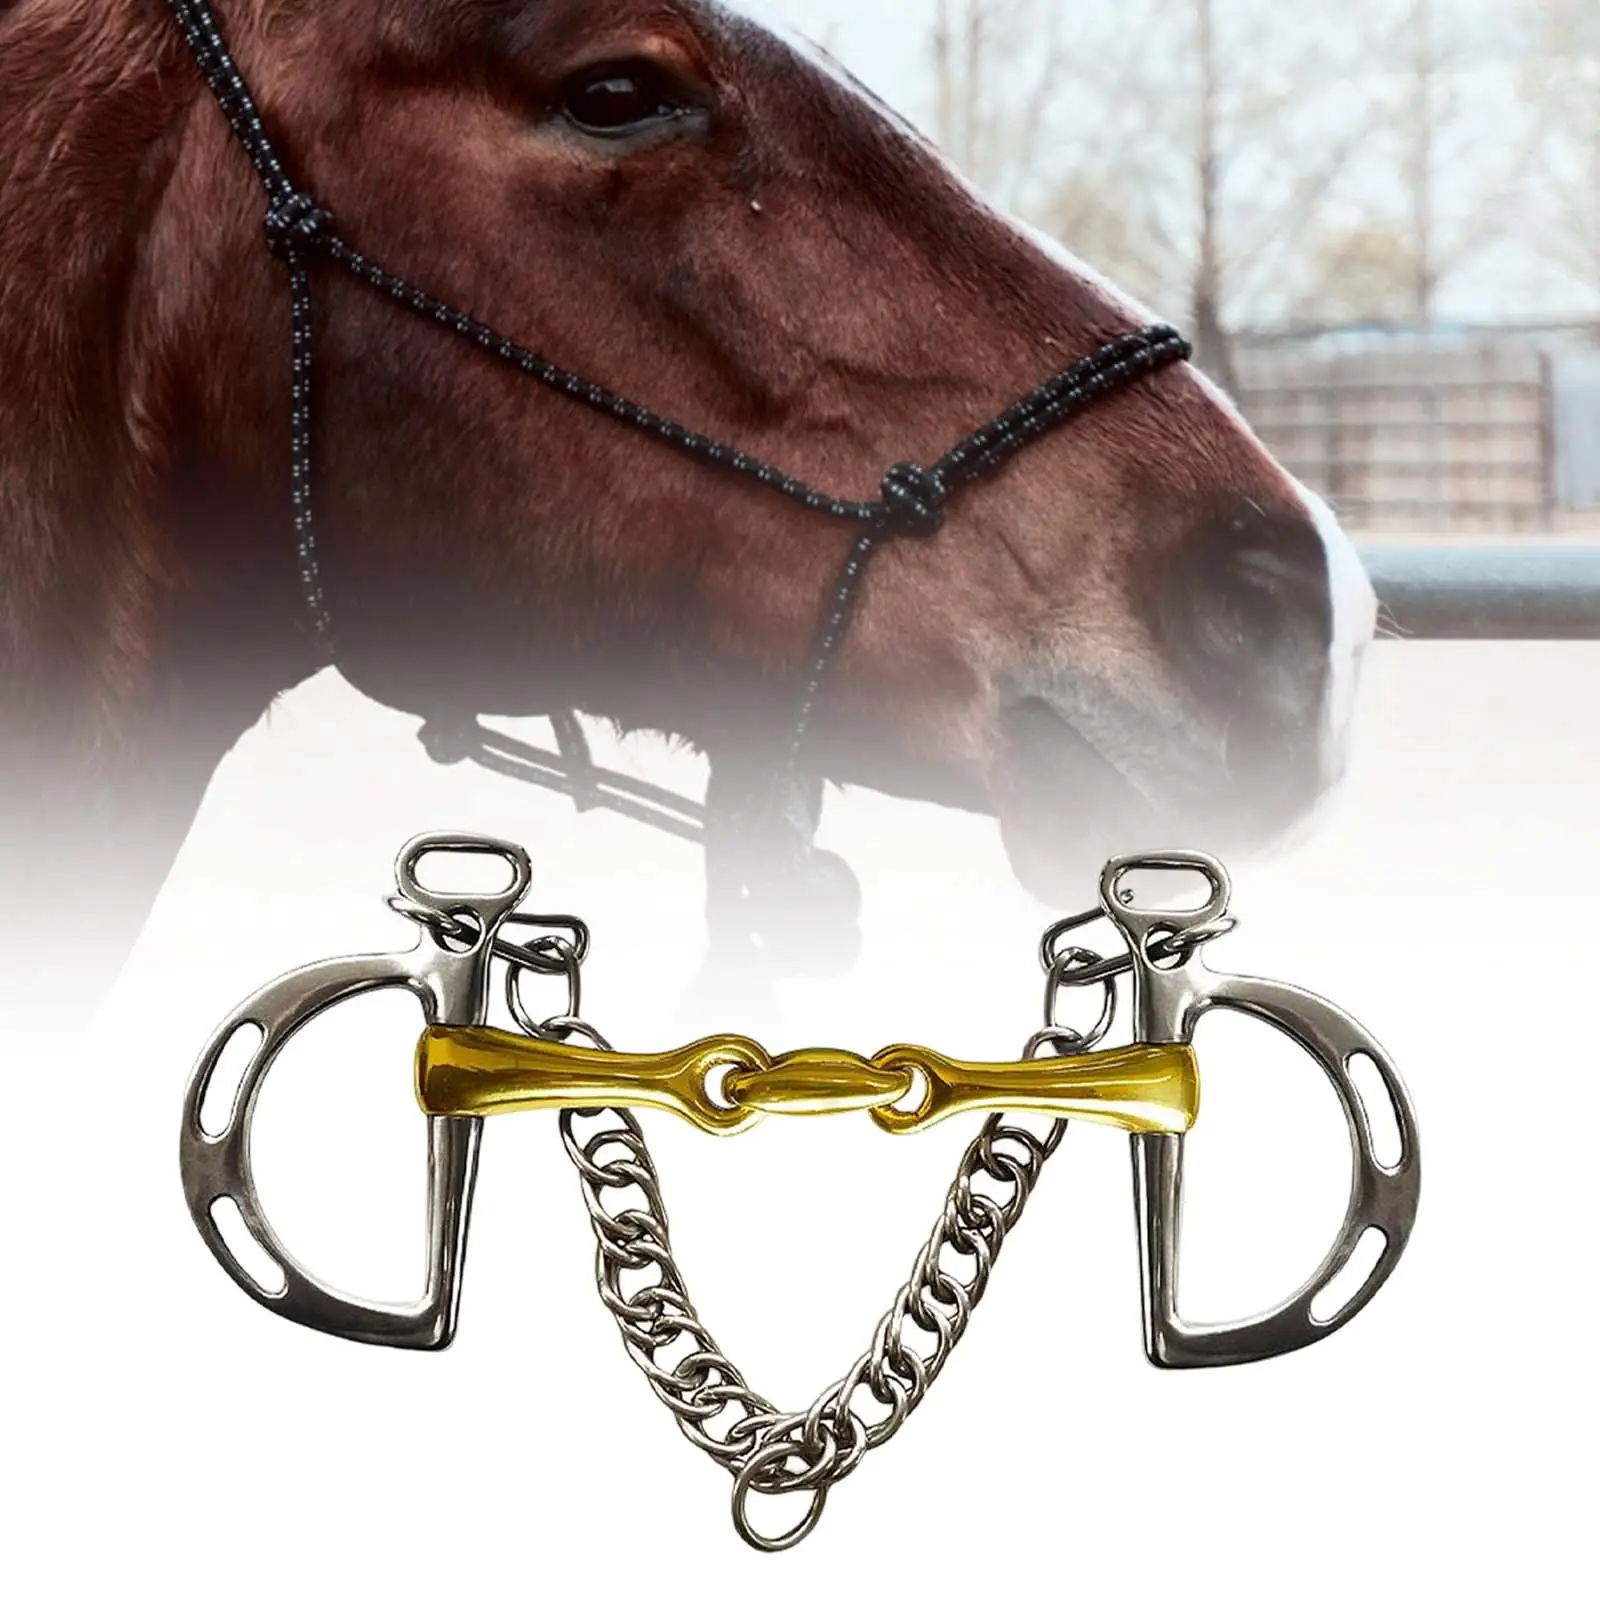 Horse Bit Copper Mouth Copper Roller W/Curb Hooks Chain Stainless Steel with Silver Trims Harness for Horse Chewing Equestrian